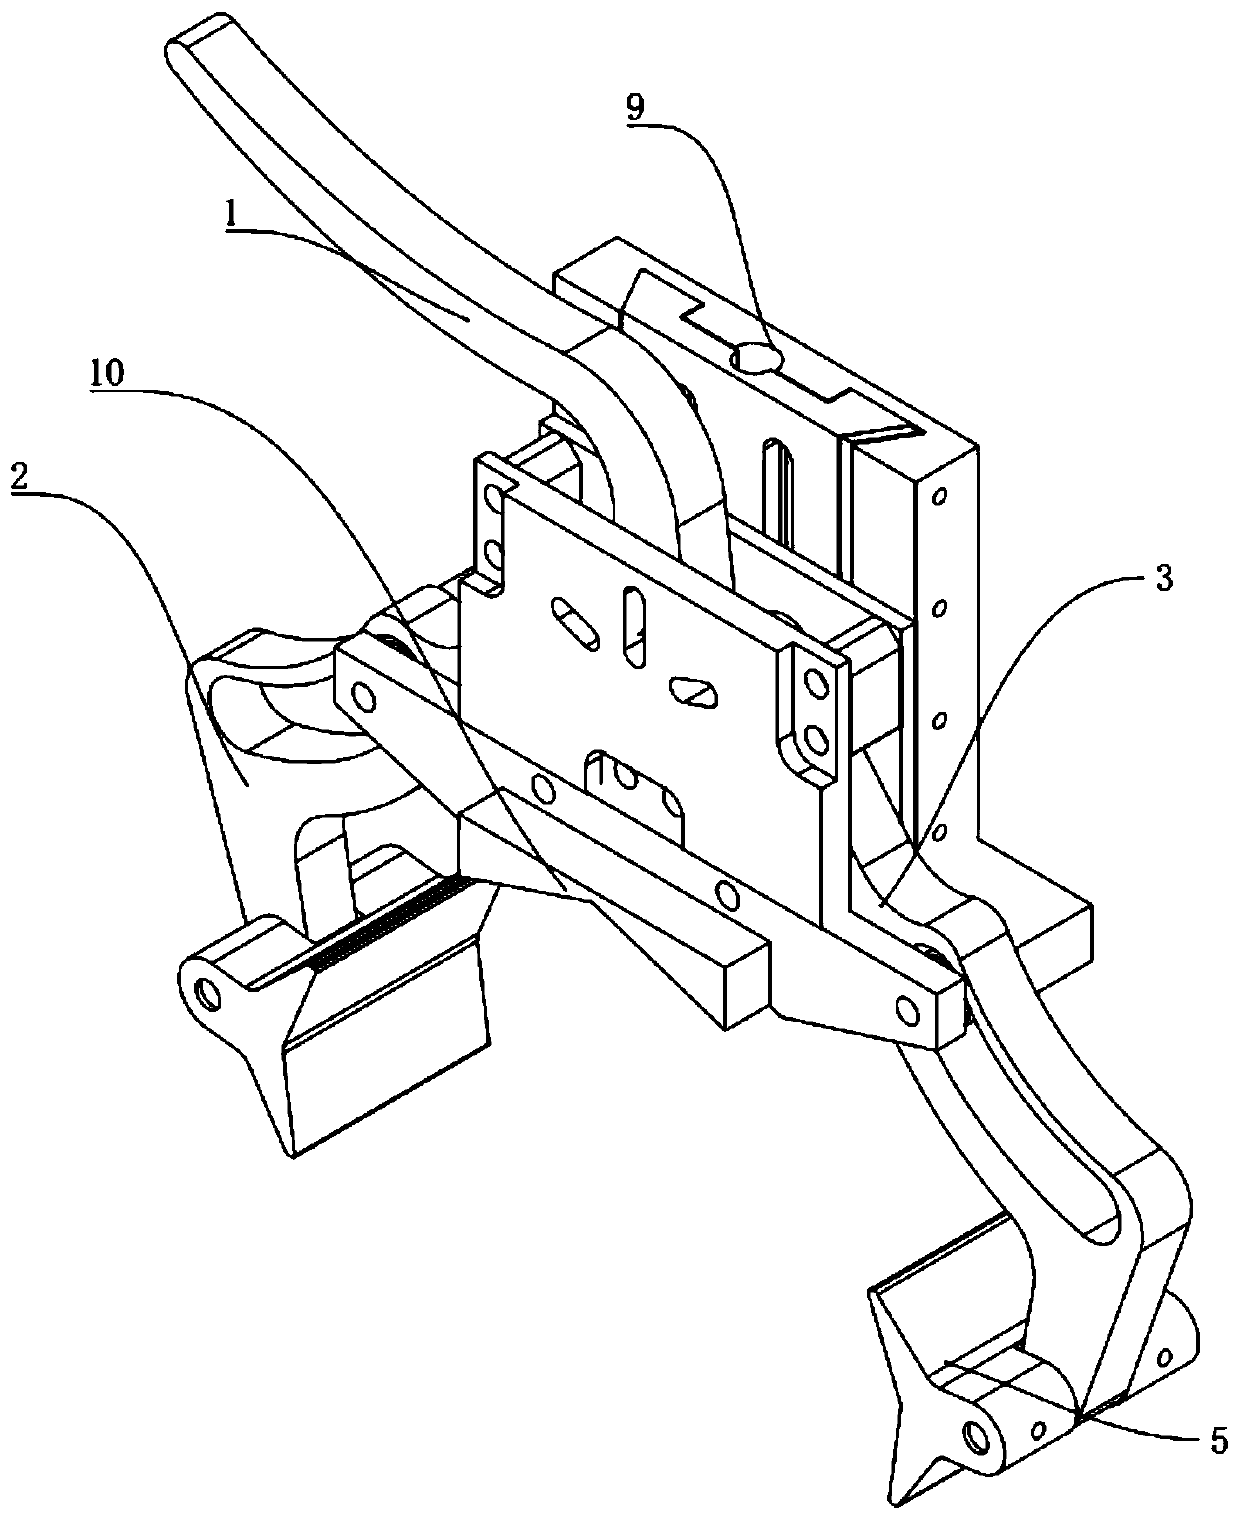 Clamp for pipeline clamping